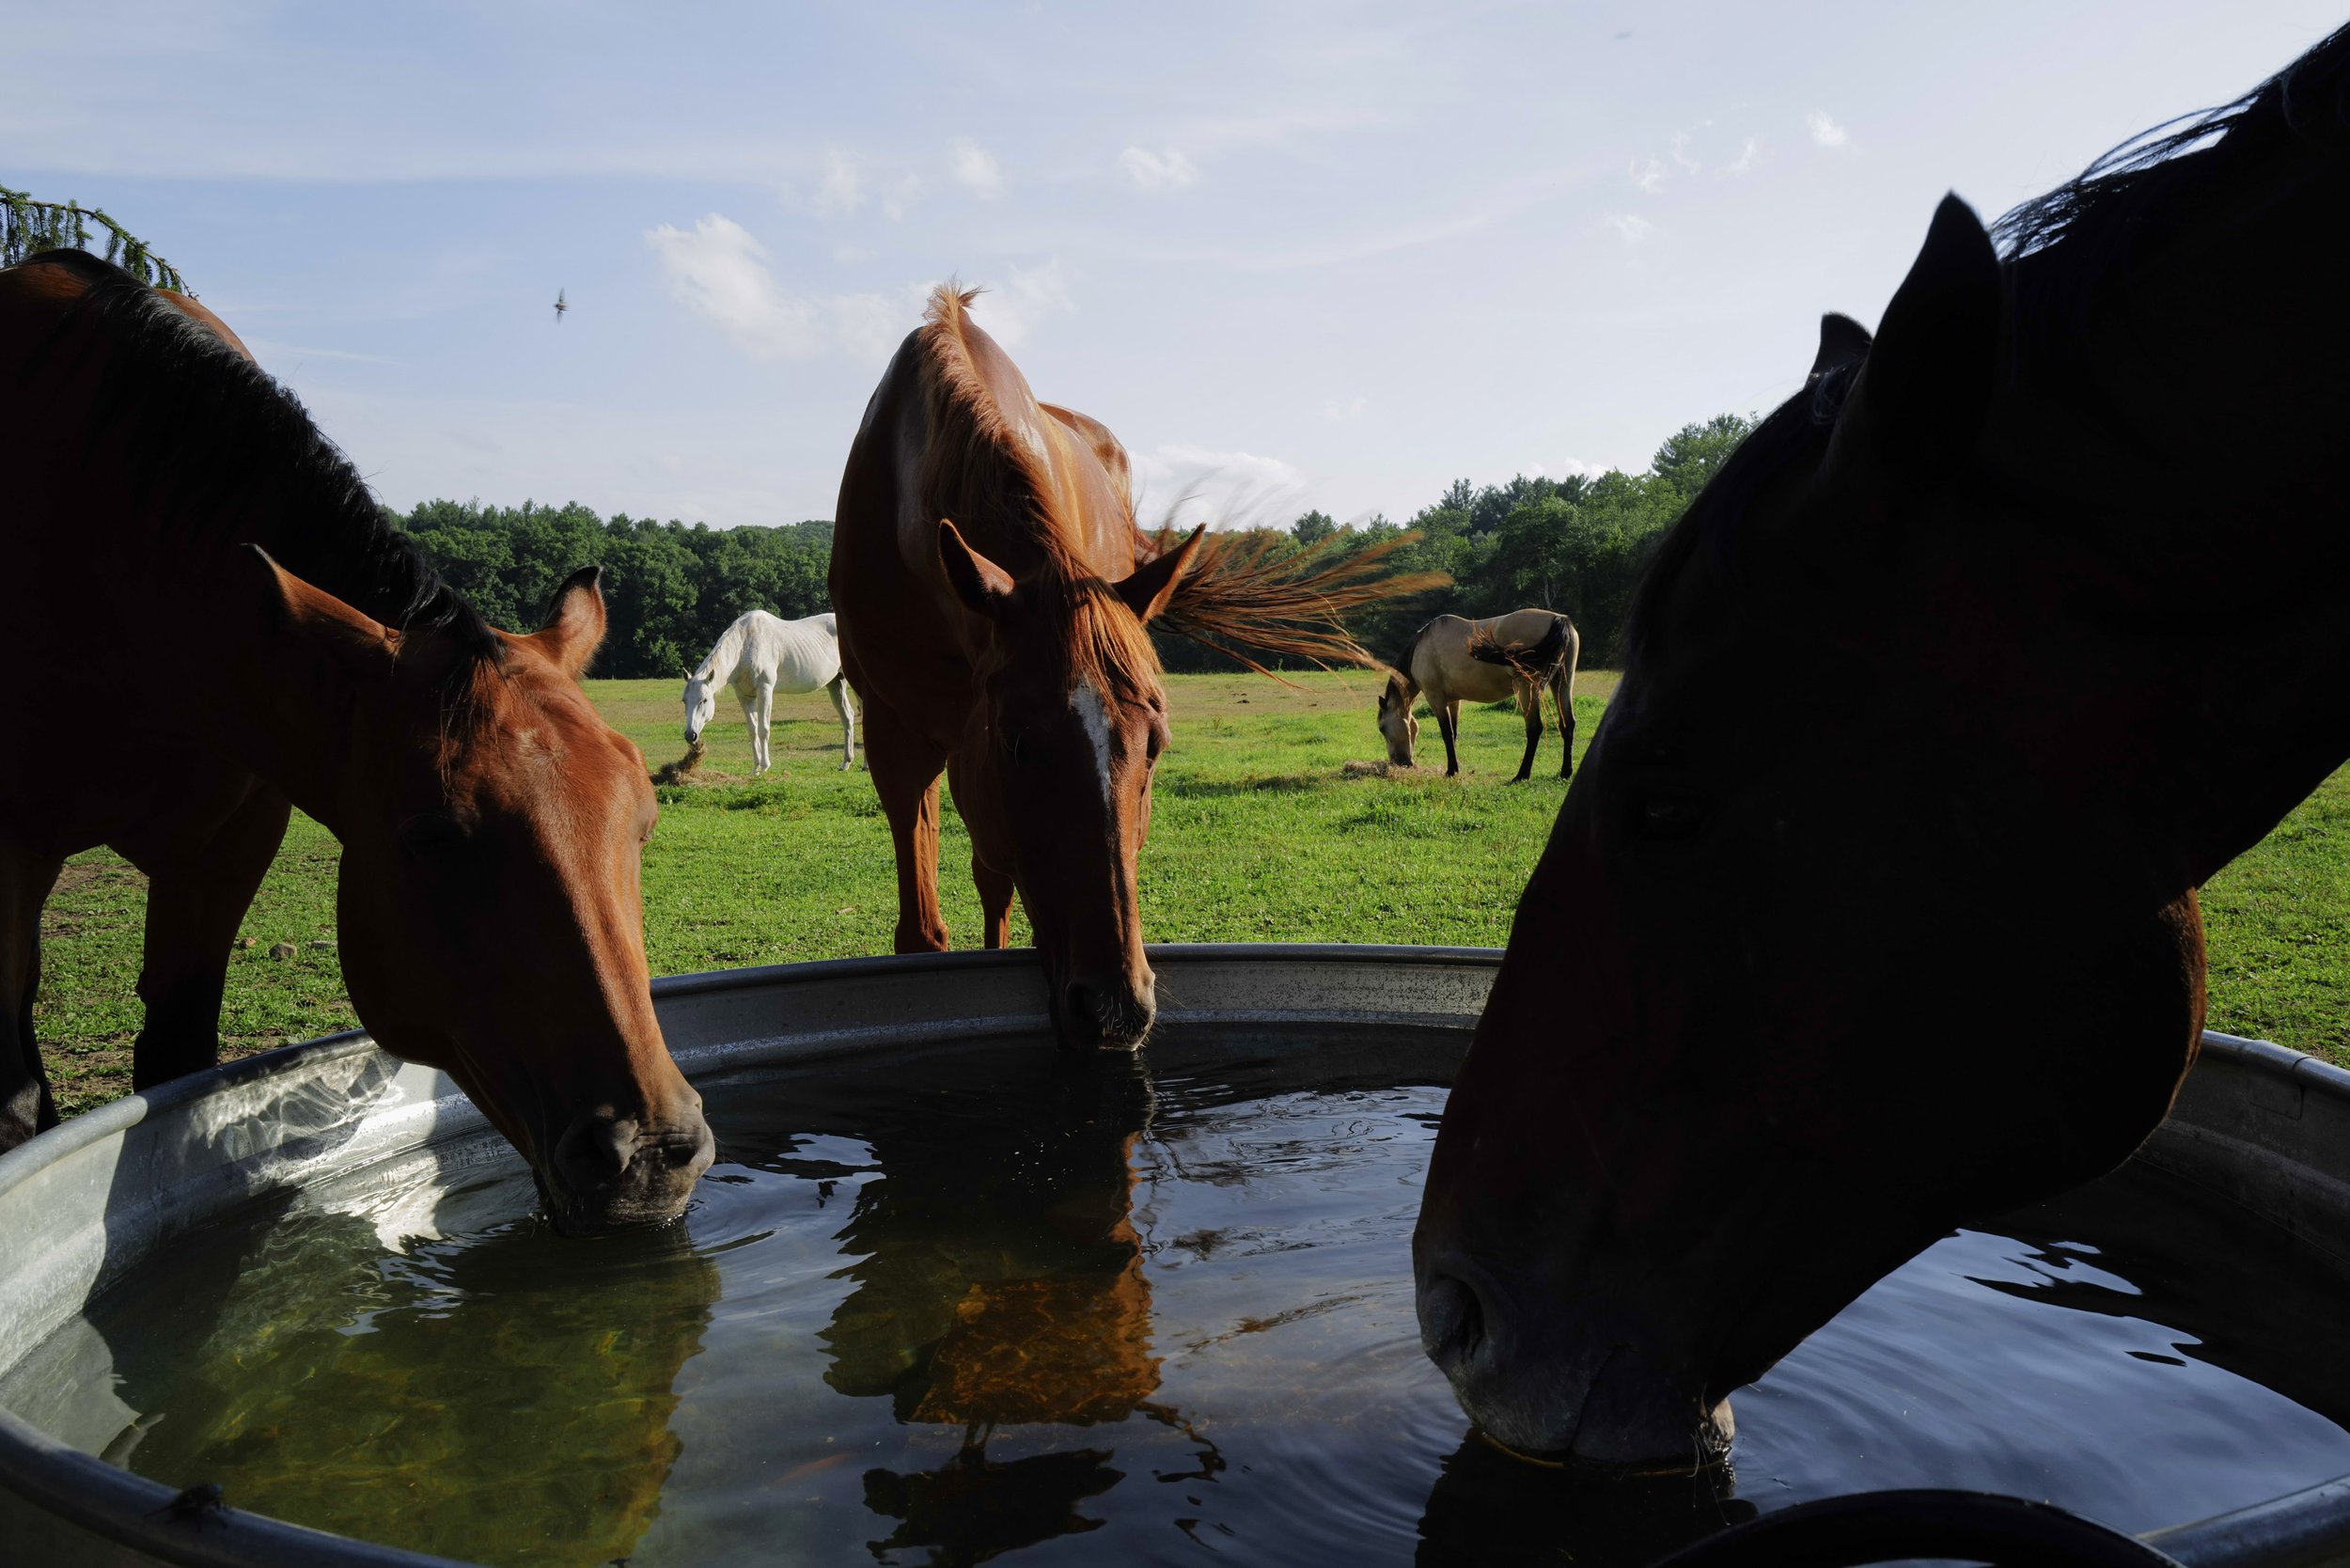  Rescued horses at Project ComeBack drink from a stock tank awaiting their veteran partners to arrive in Holliston, Mass. on July 21, 2022.  During the six-week program, veterans hear the back stories of each horse, often ones of trauma and neglect, 